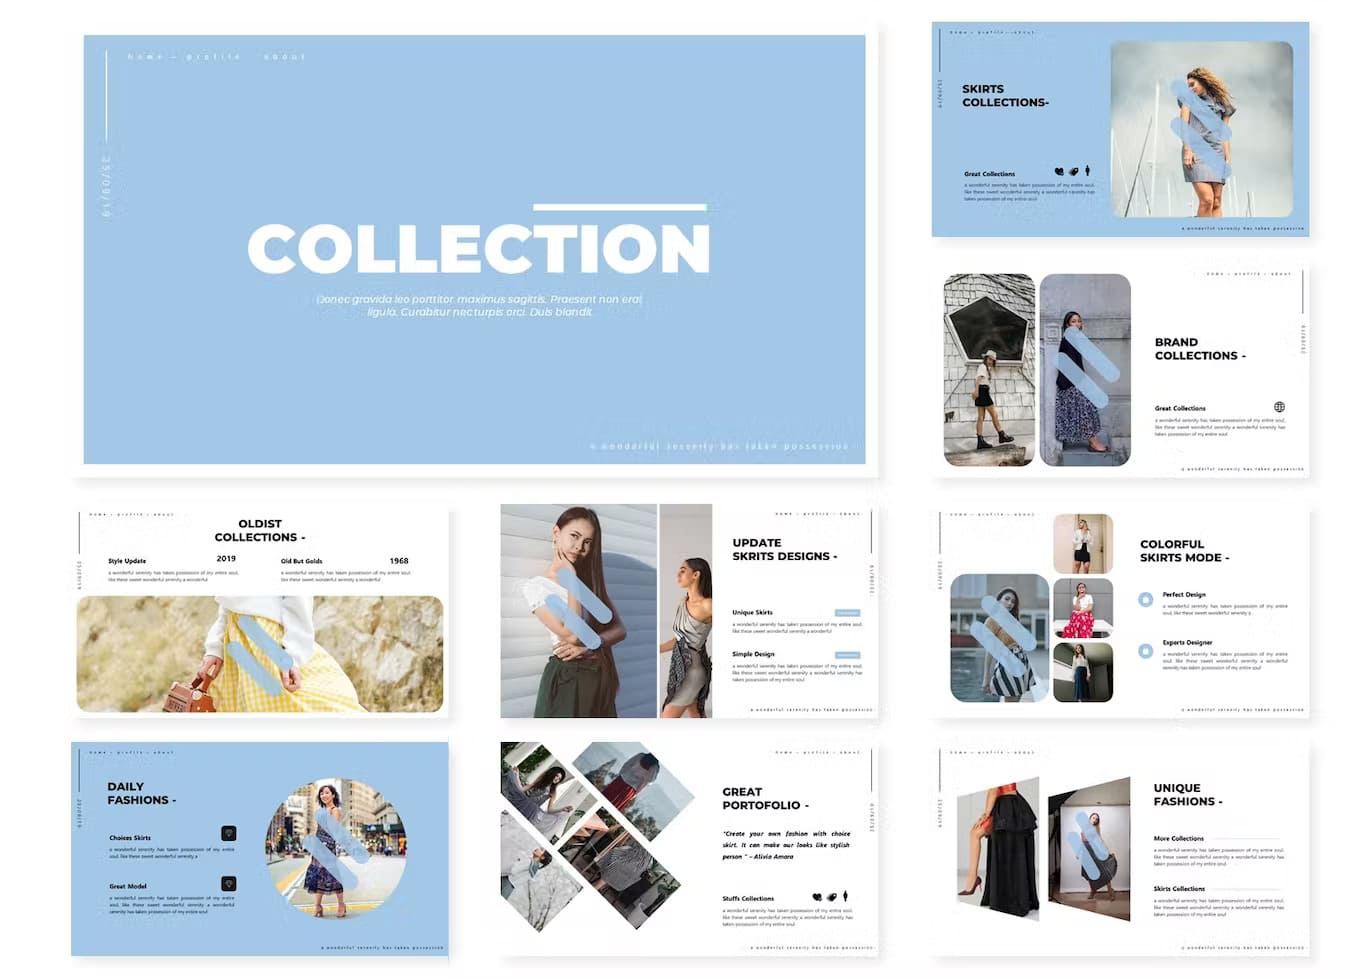 Slide about brand advantages of Collection Powerpoint template.